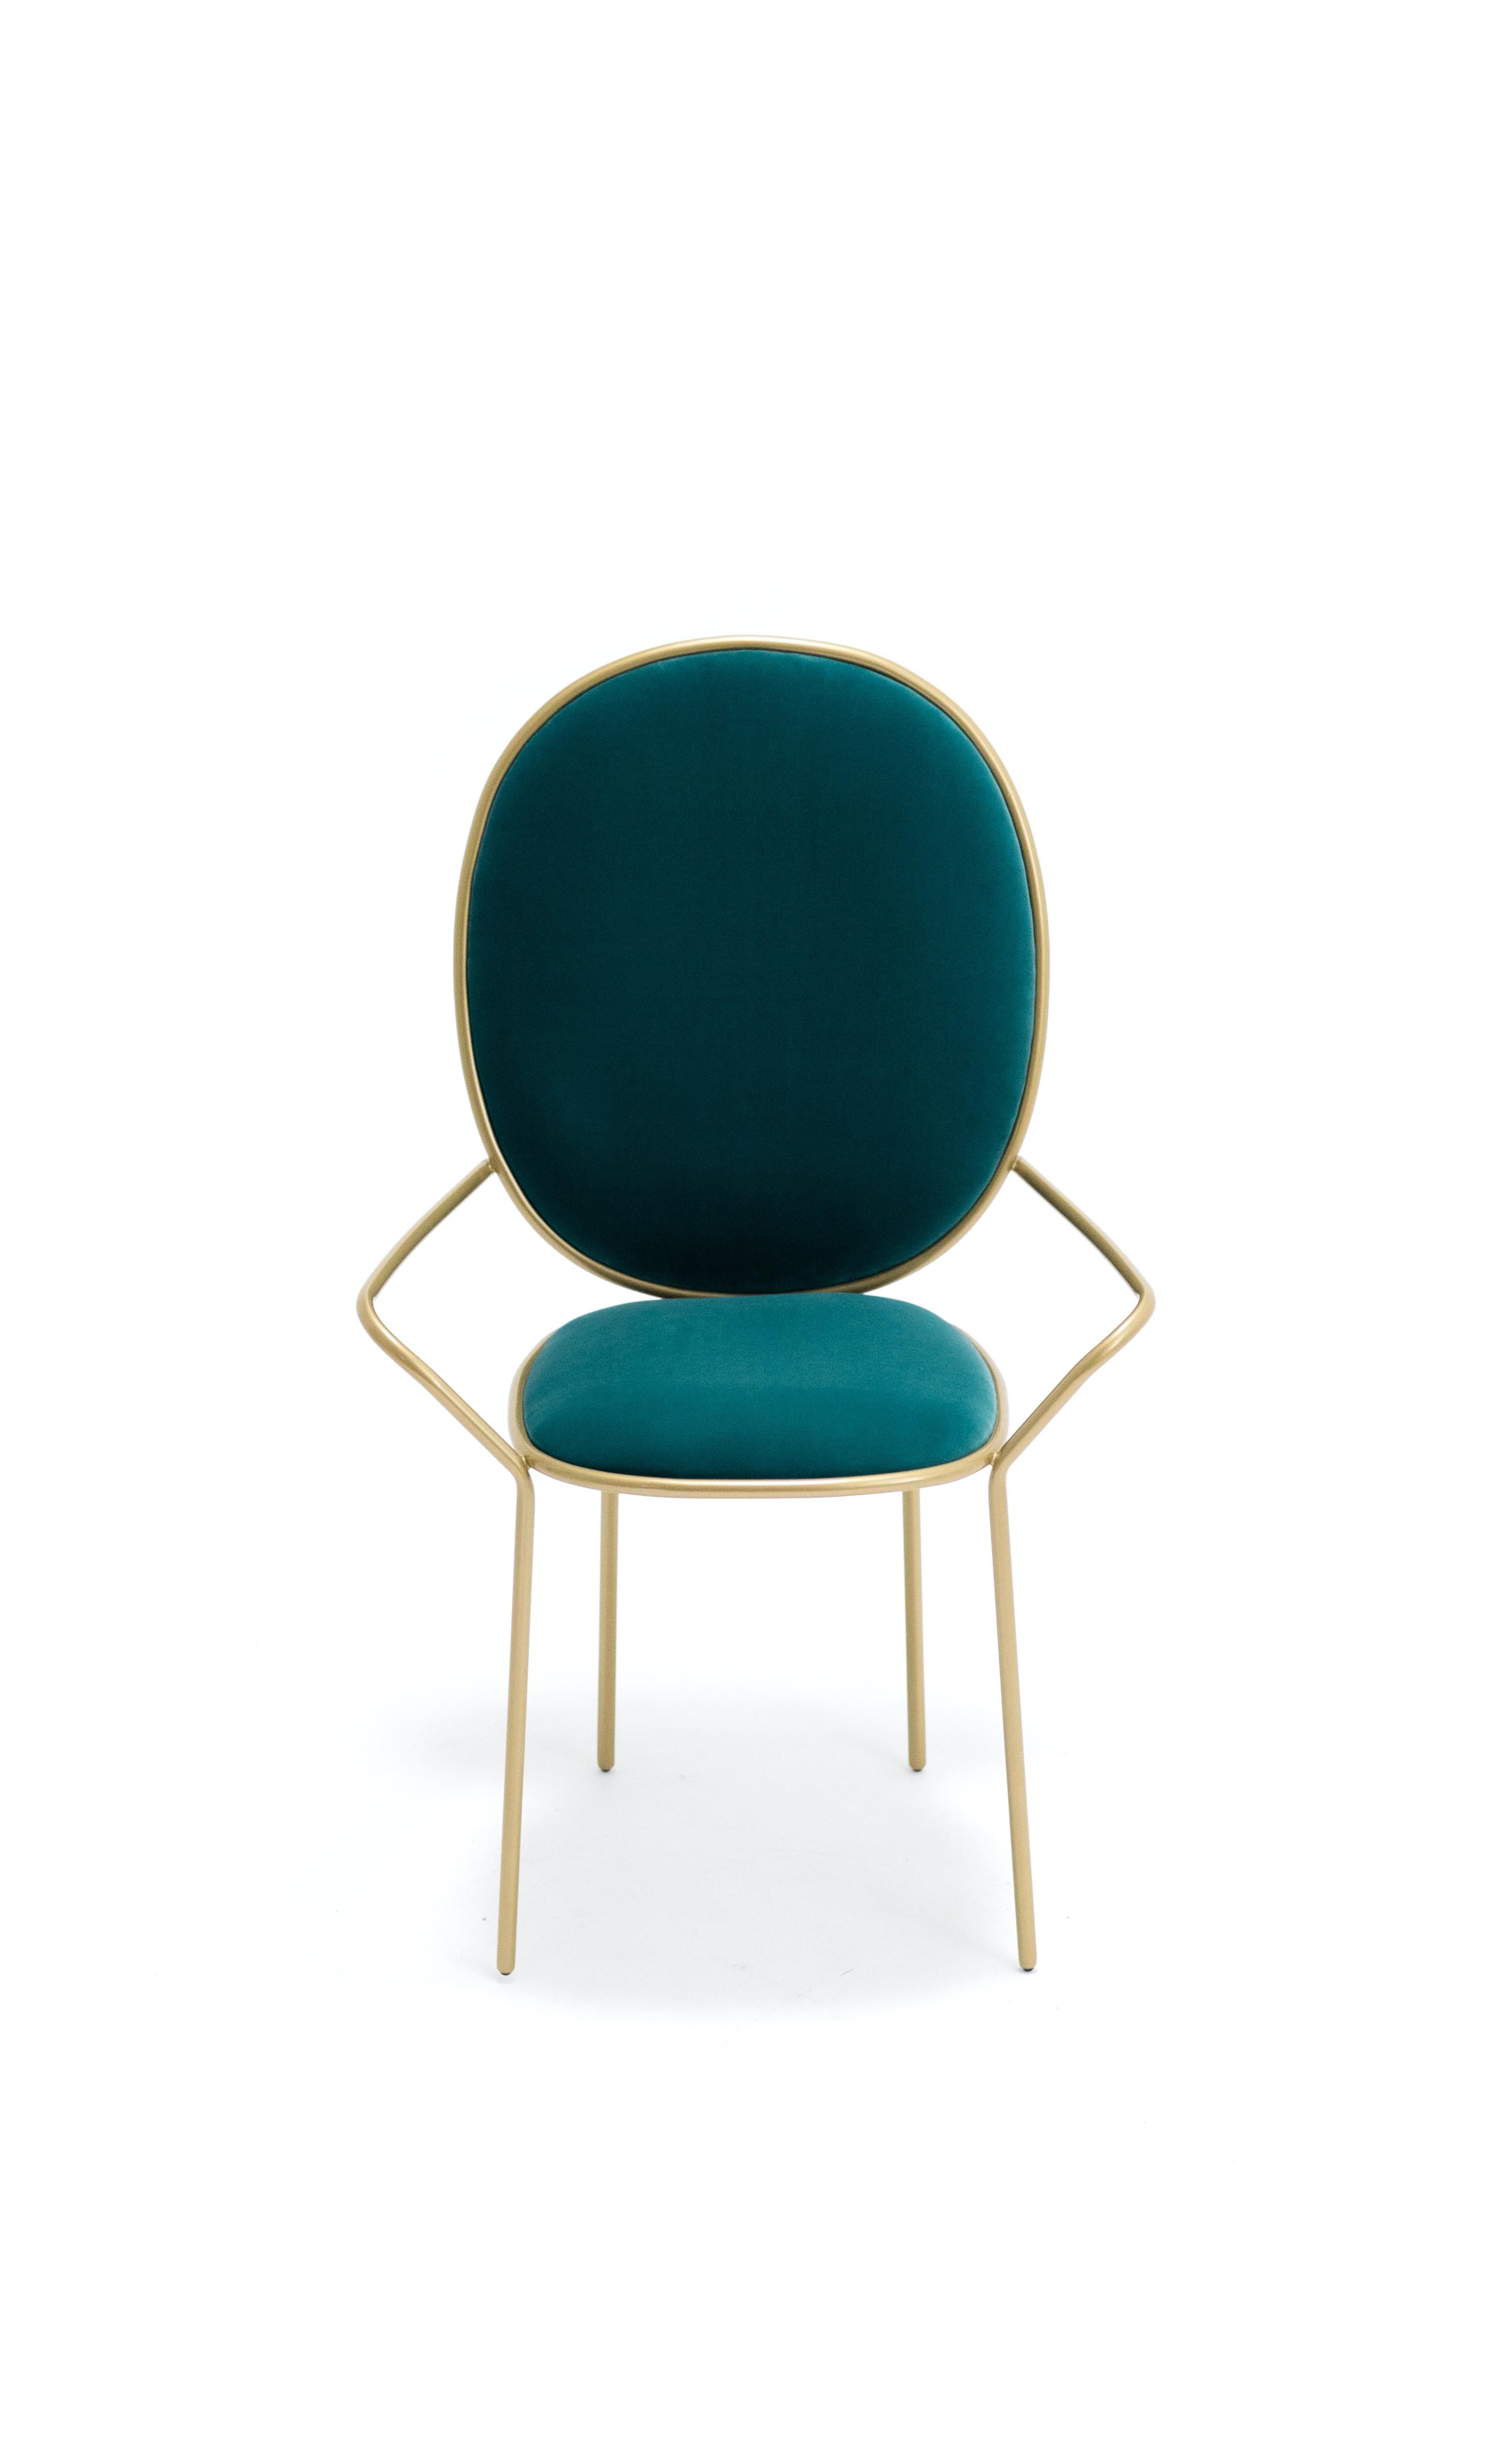 Slovenian Contemporary Ocean Green Velvet Upholstered Dining Armchair, Stay by Nika Zupanc